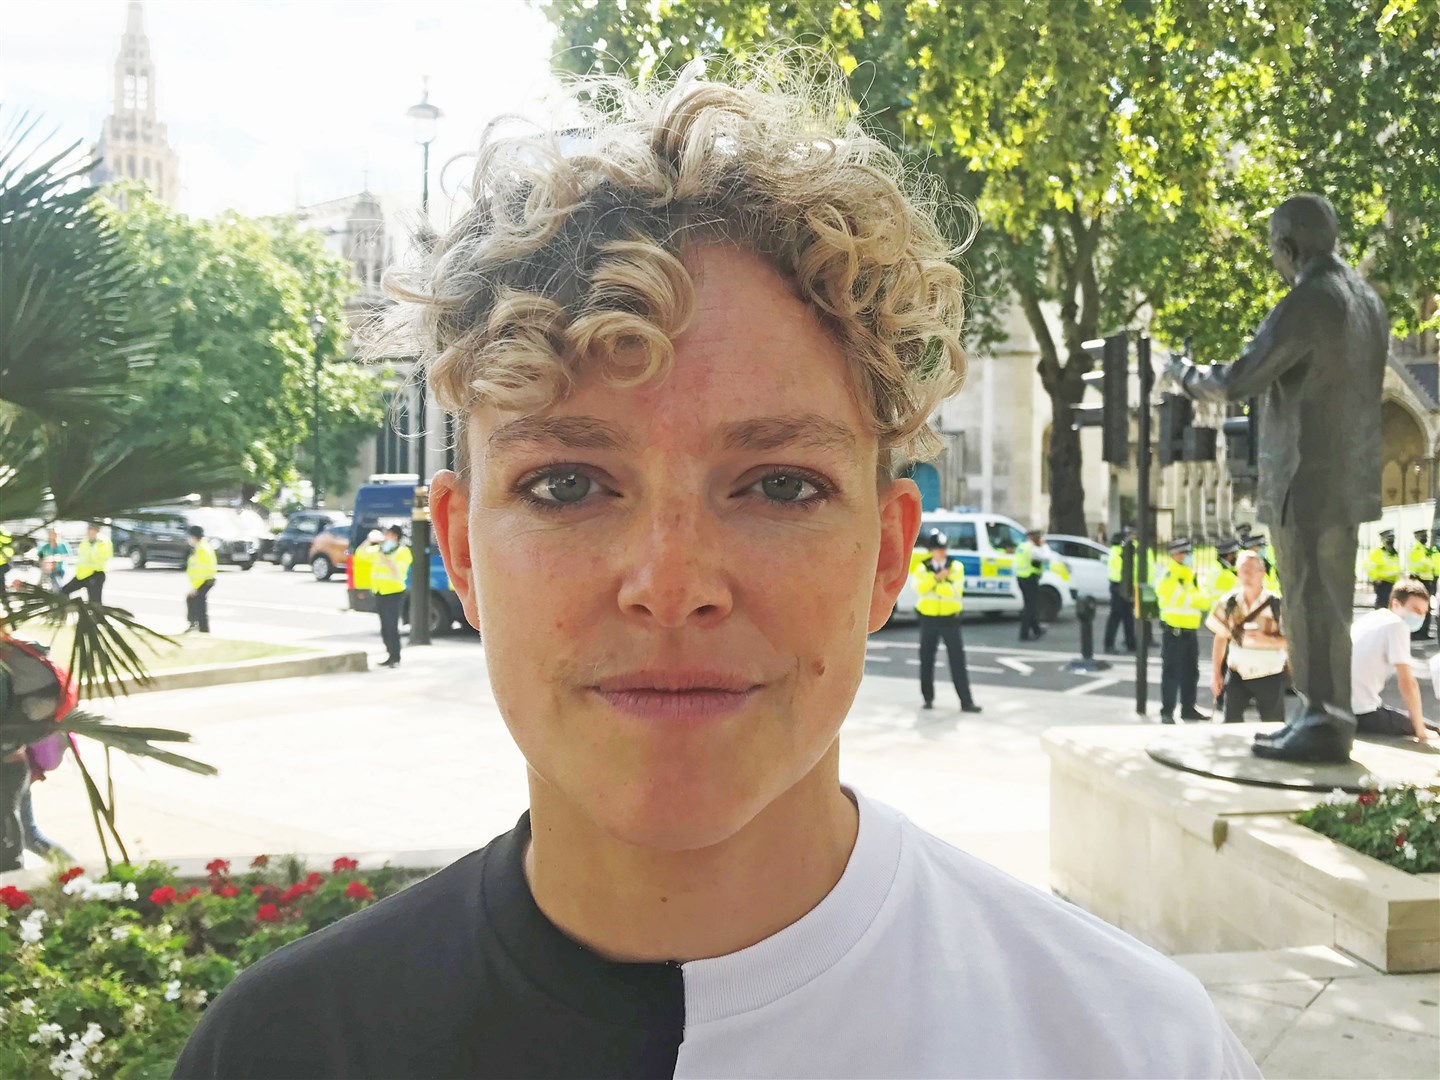 Extinction Rebellion spokesperson Tamsin Omond said the protesters wanted Prime Minister Boris Johnson to see and hear their action (Ryan Hooper/PA)